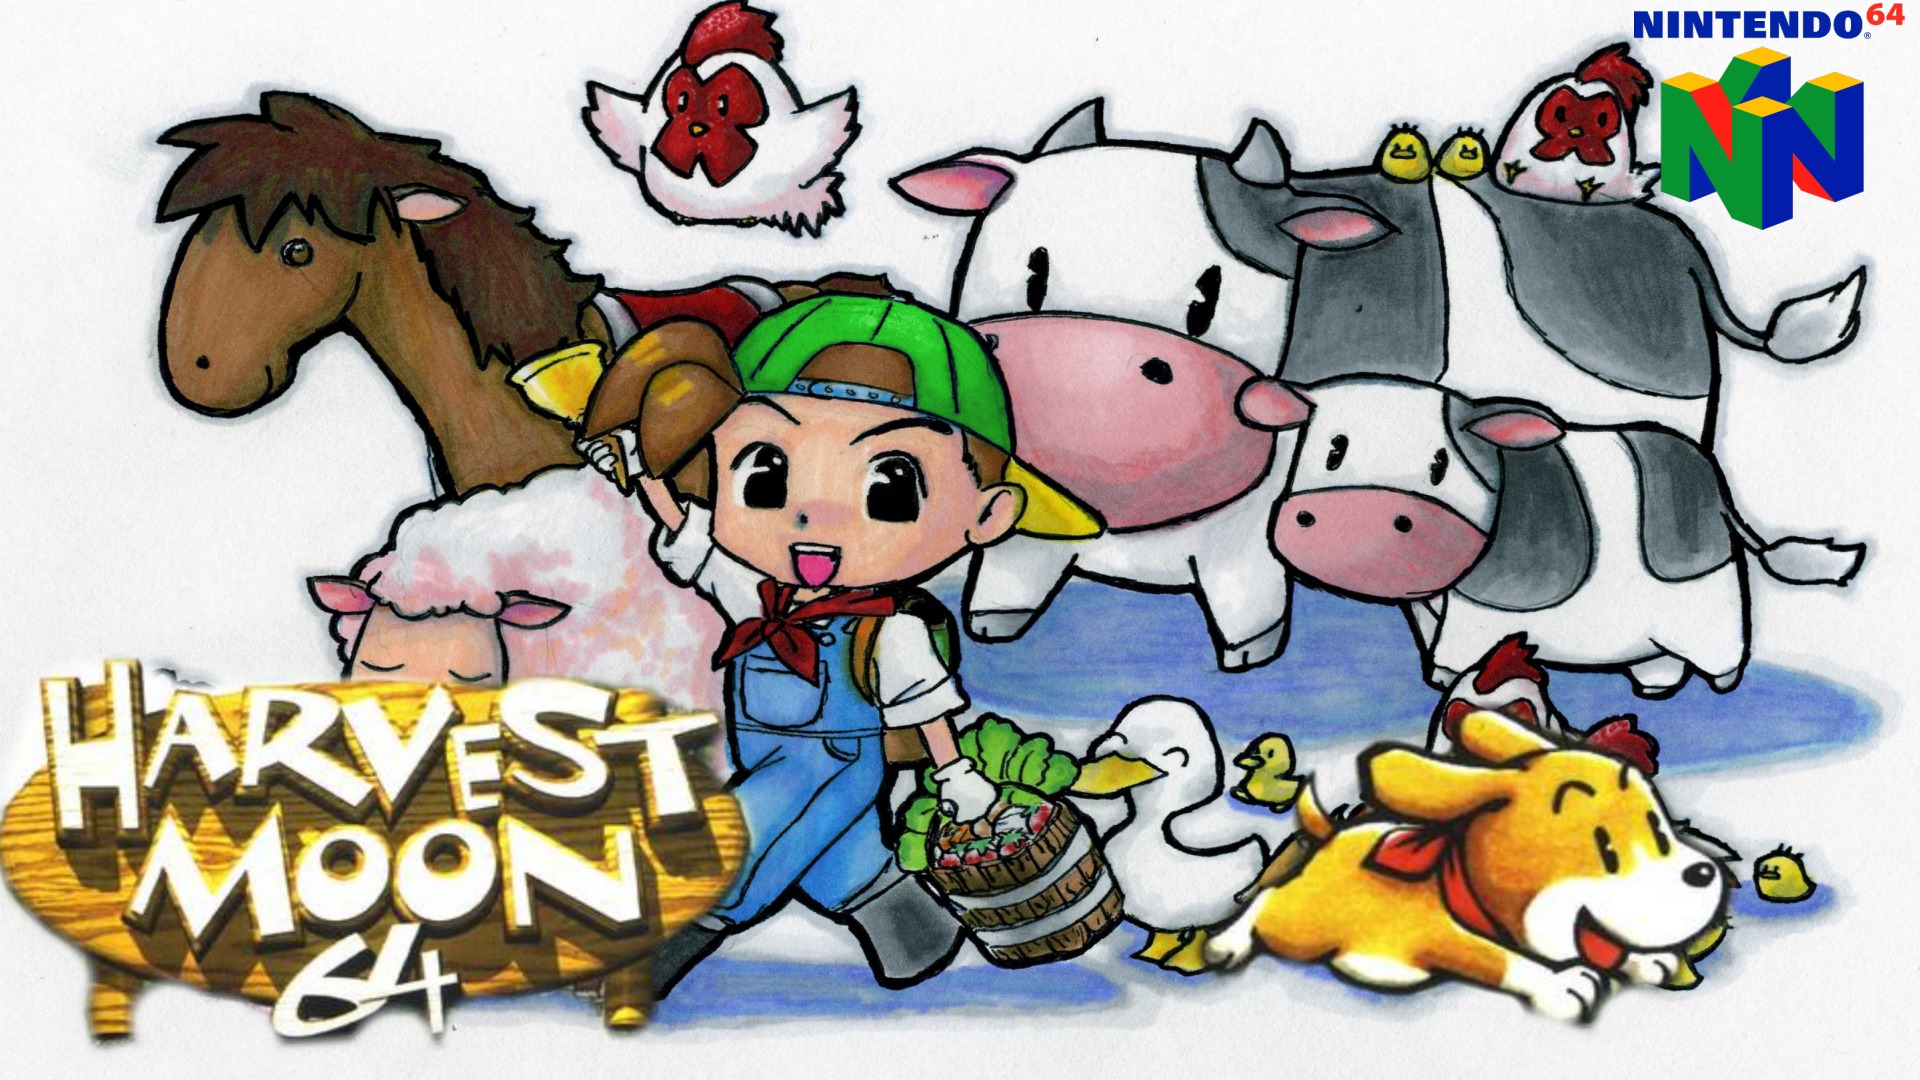 Video Game Harvest Moon 64 HD Wallpaper | Background Image